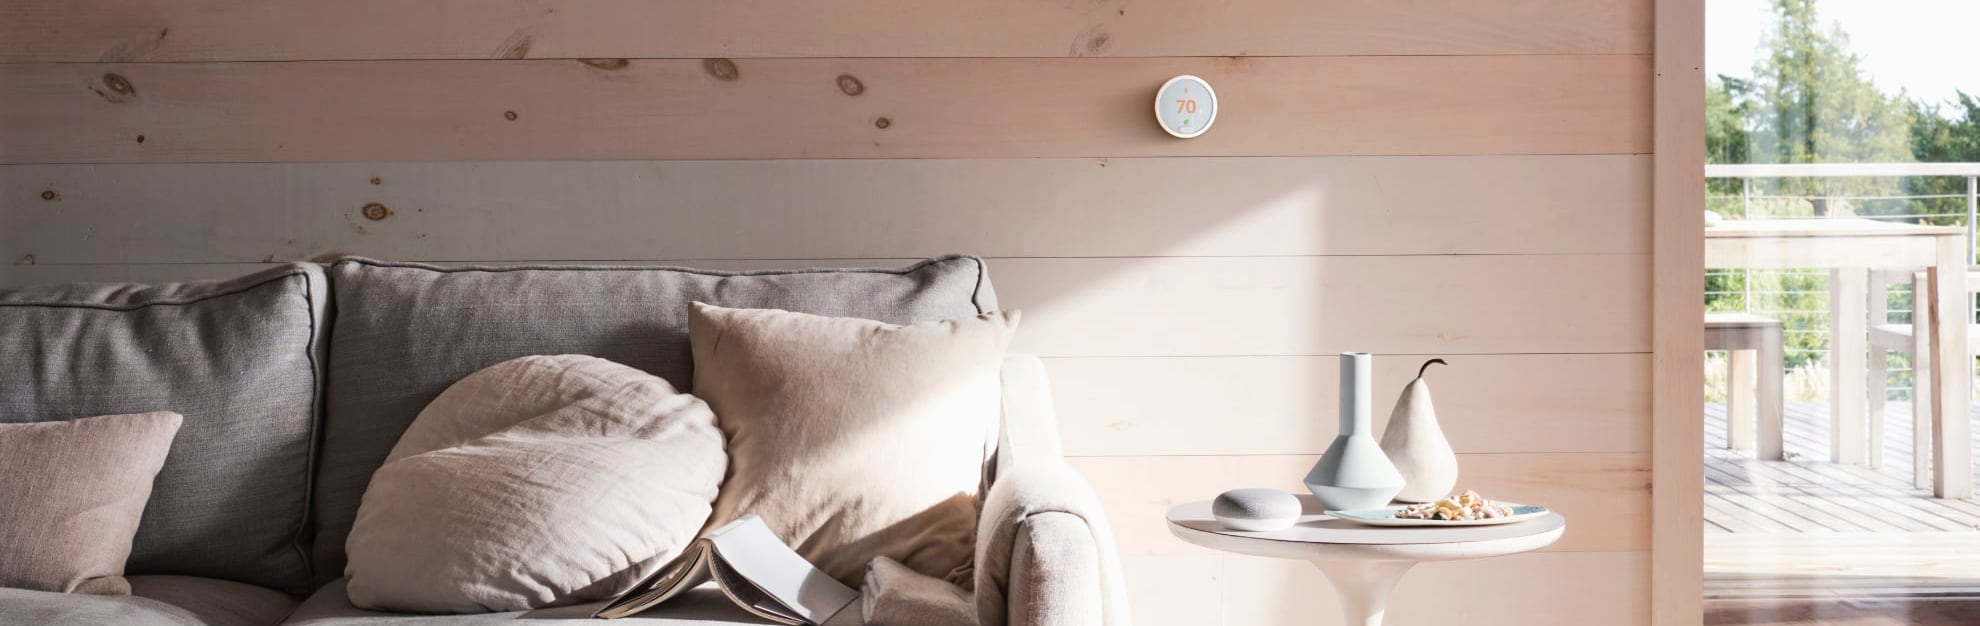 Vivint Home Automation in Portland